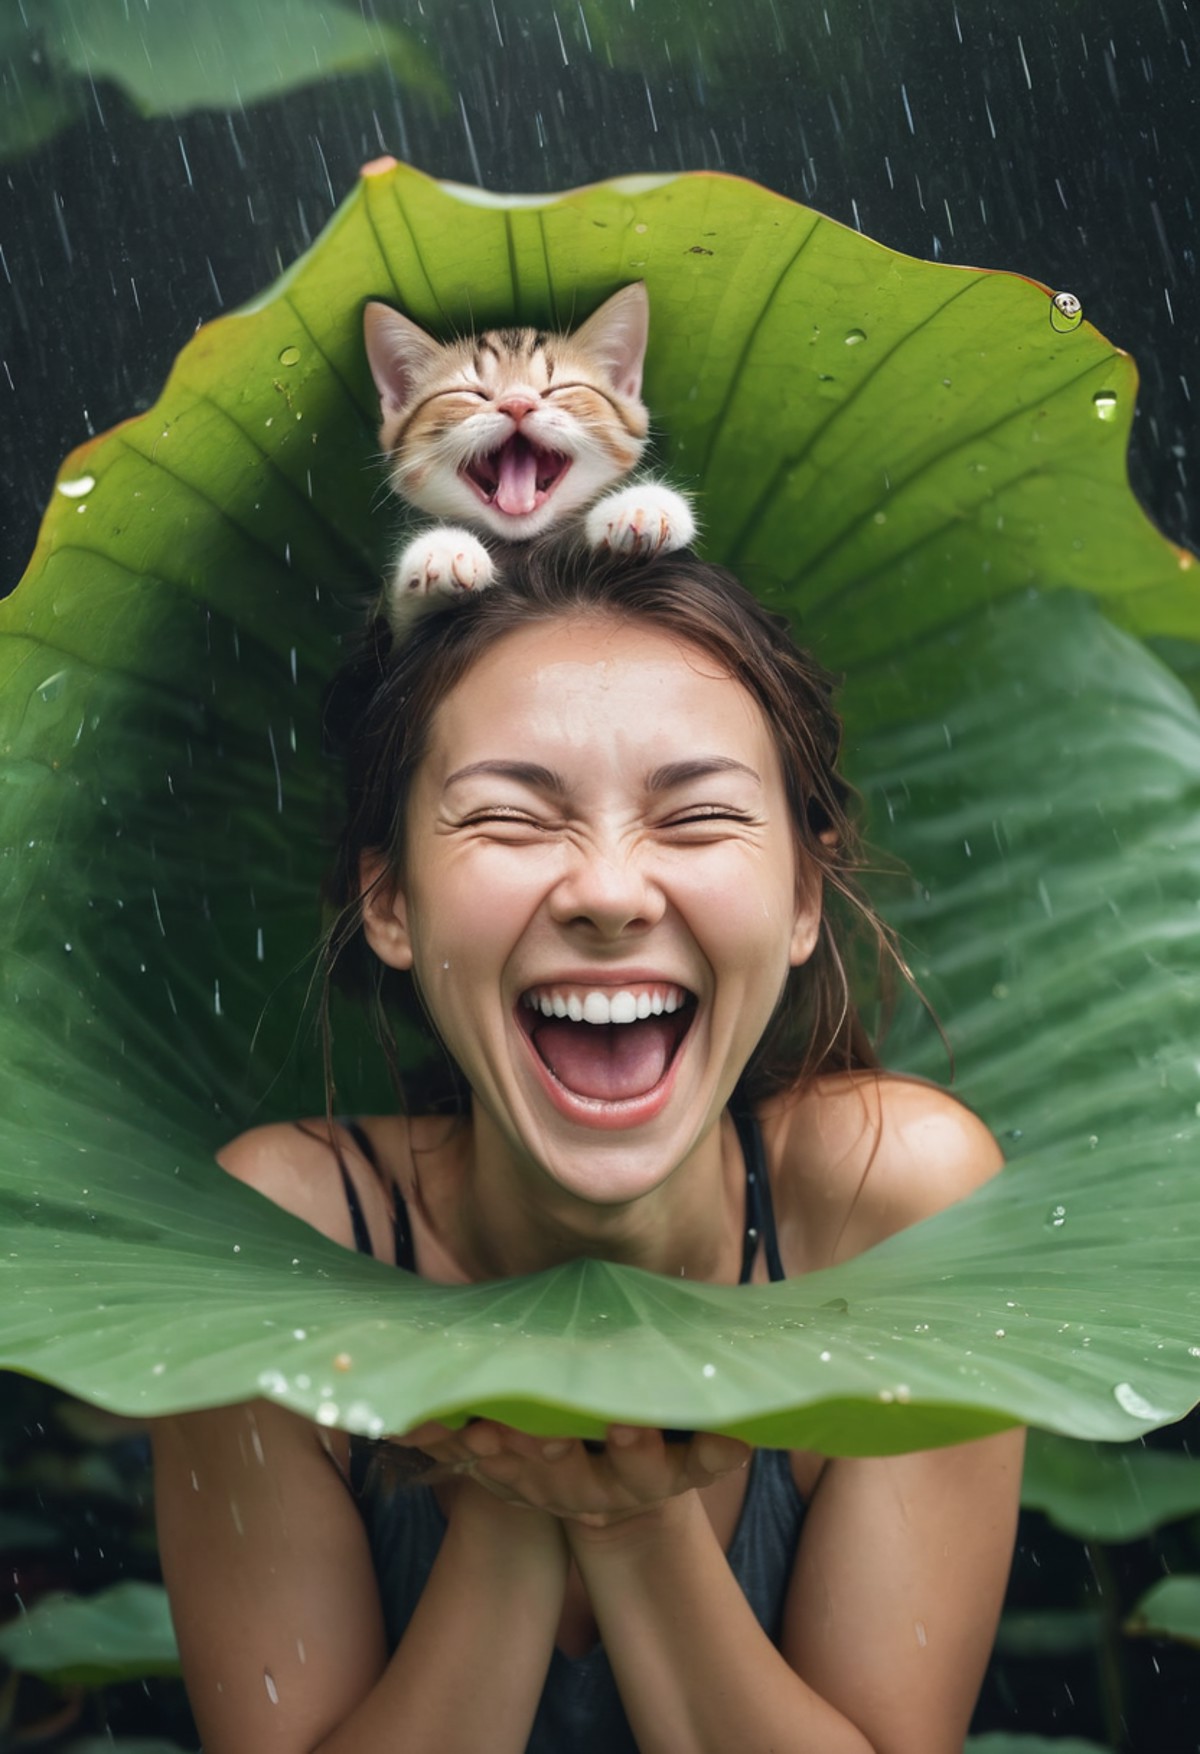 Photo of a woman laughing hysterically with a kitten on top of her head,  hiding under a big lotus leaf in the rain